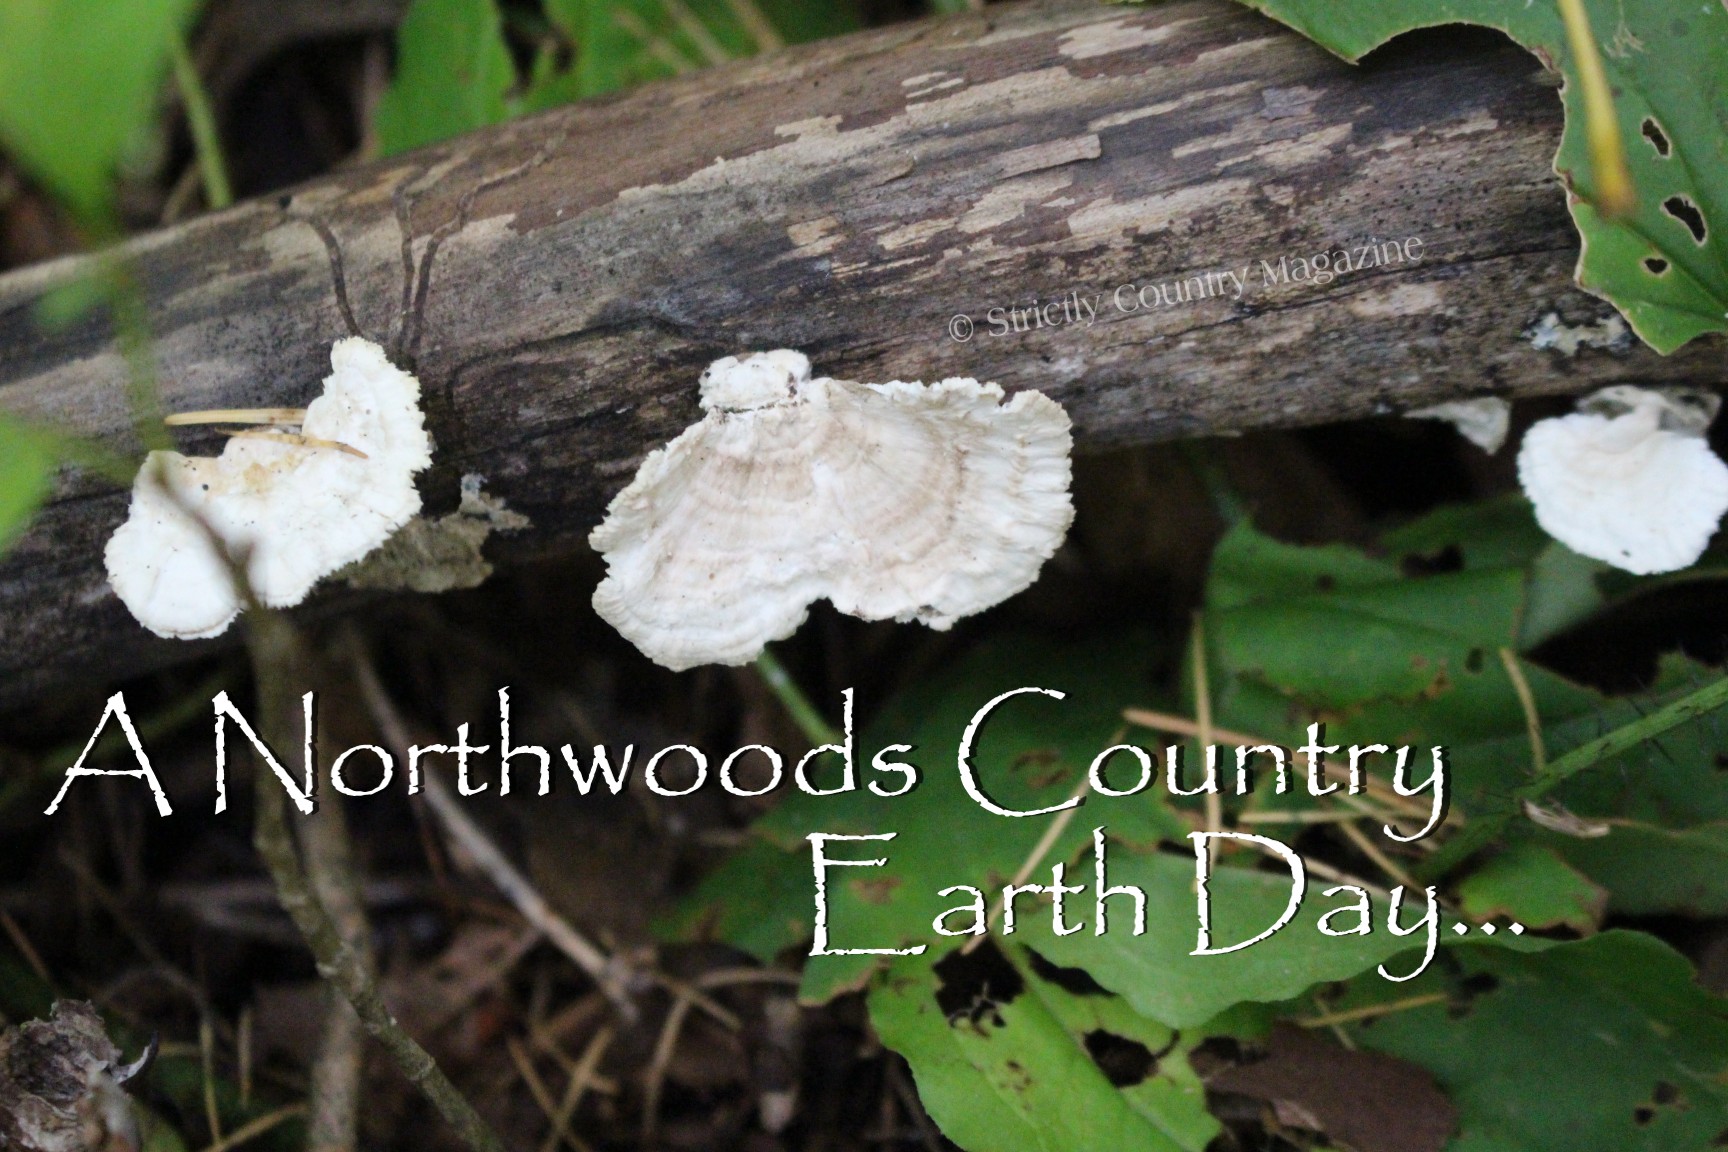 Strictly Country copyright A Northwoods Country Earth Day title